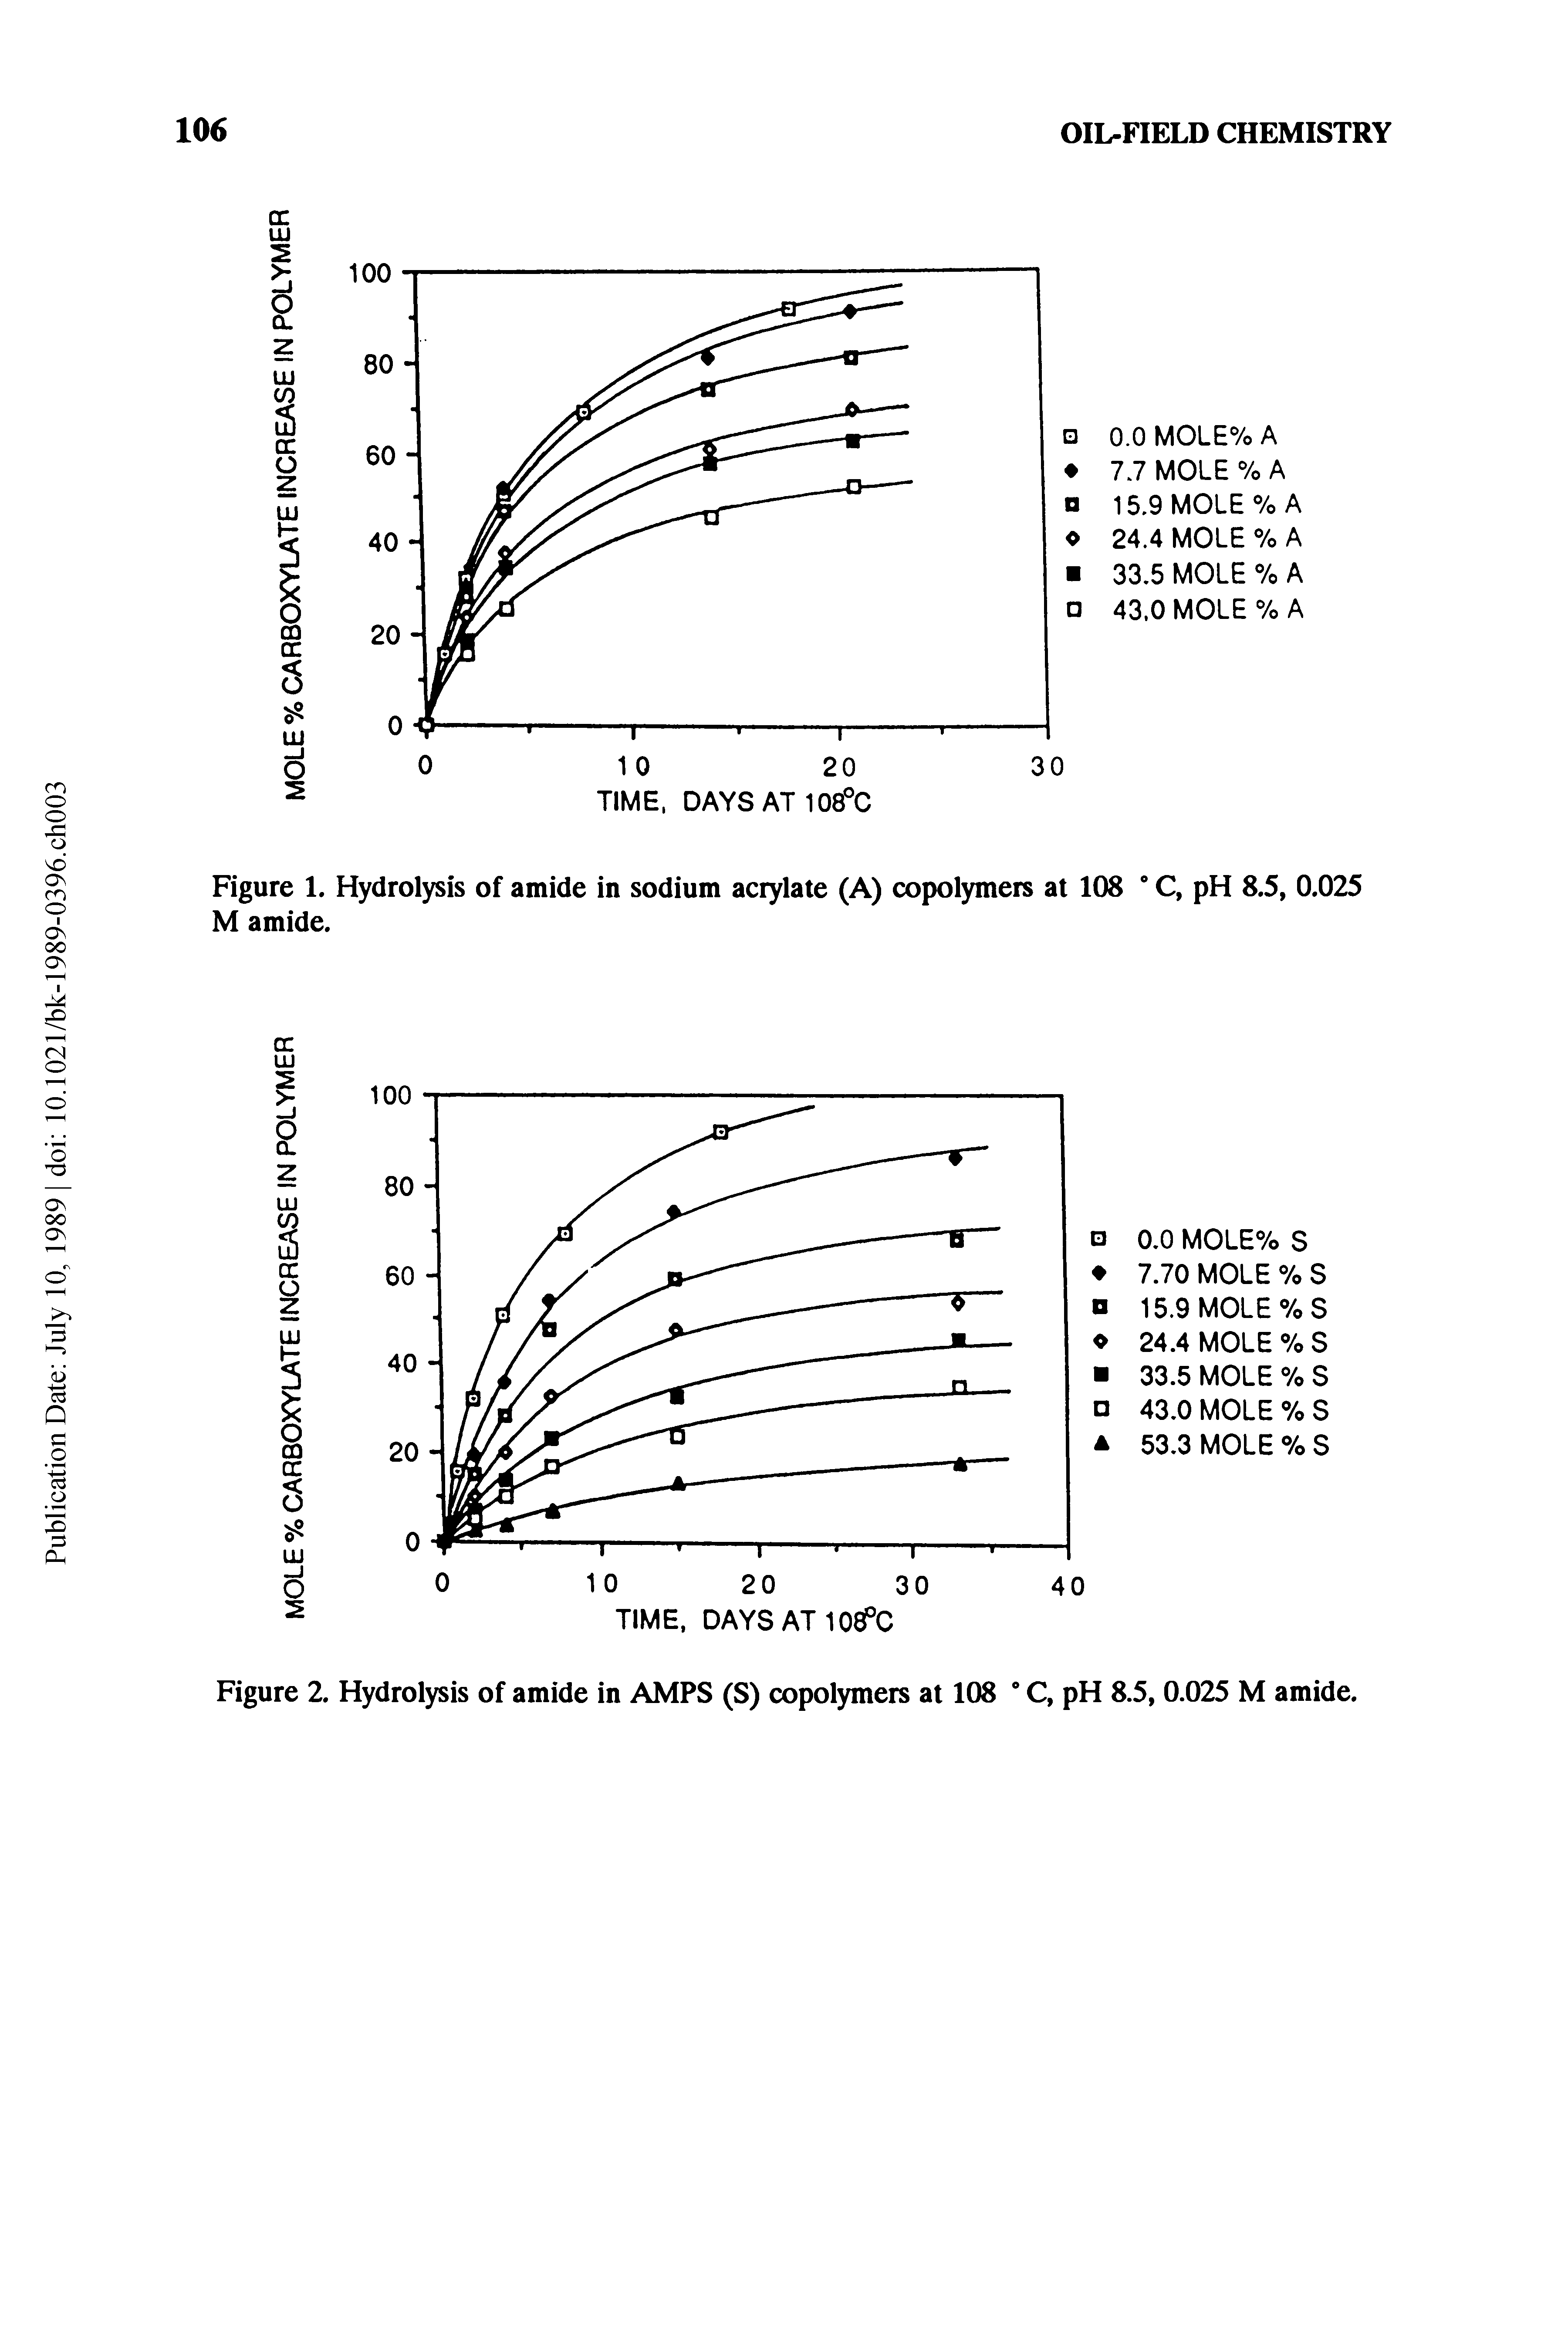 Figure 1. Hydrolysis of amide in sodium acrylate (A) copolymers at 108 ° C, pH 8.5, 0.025 M amide.